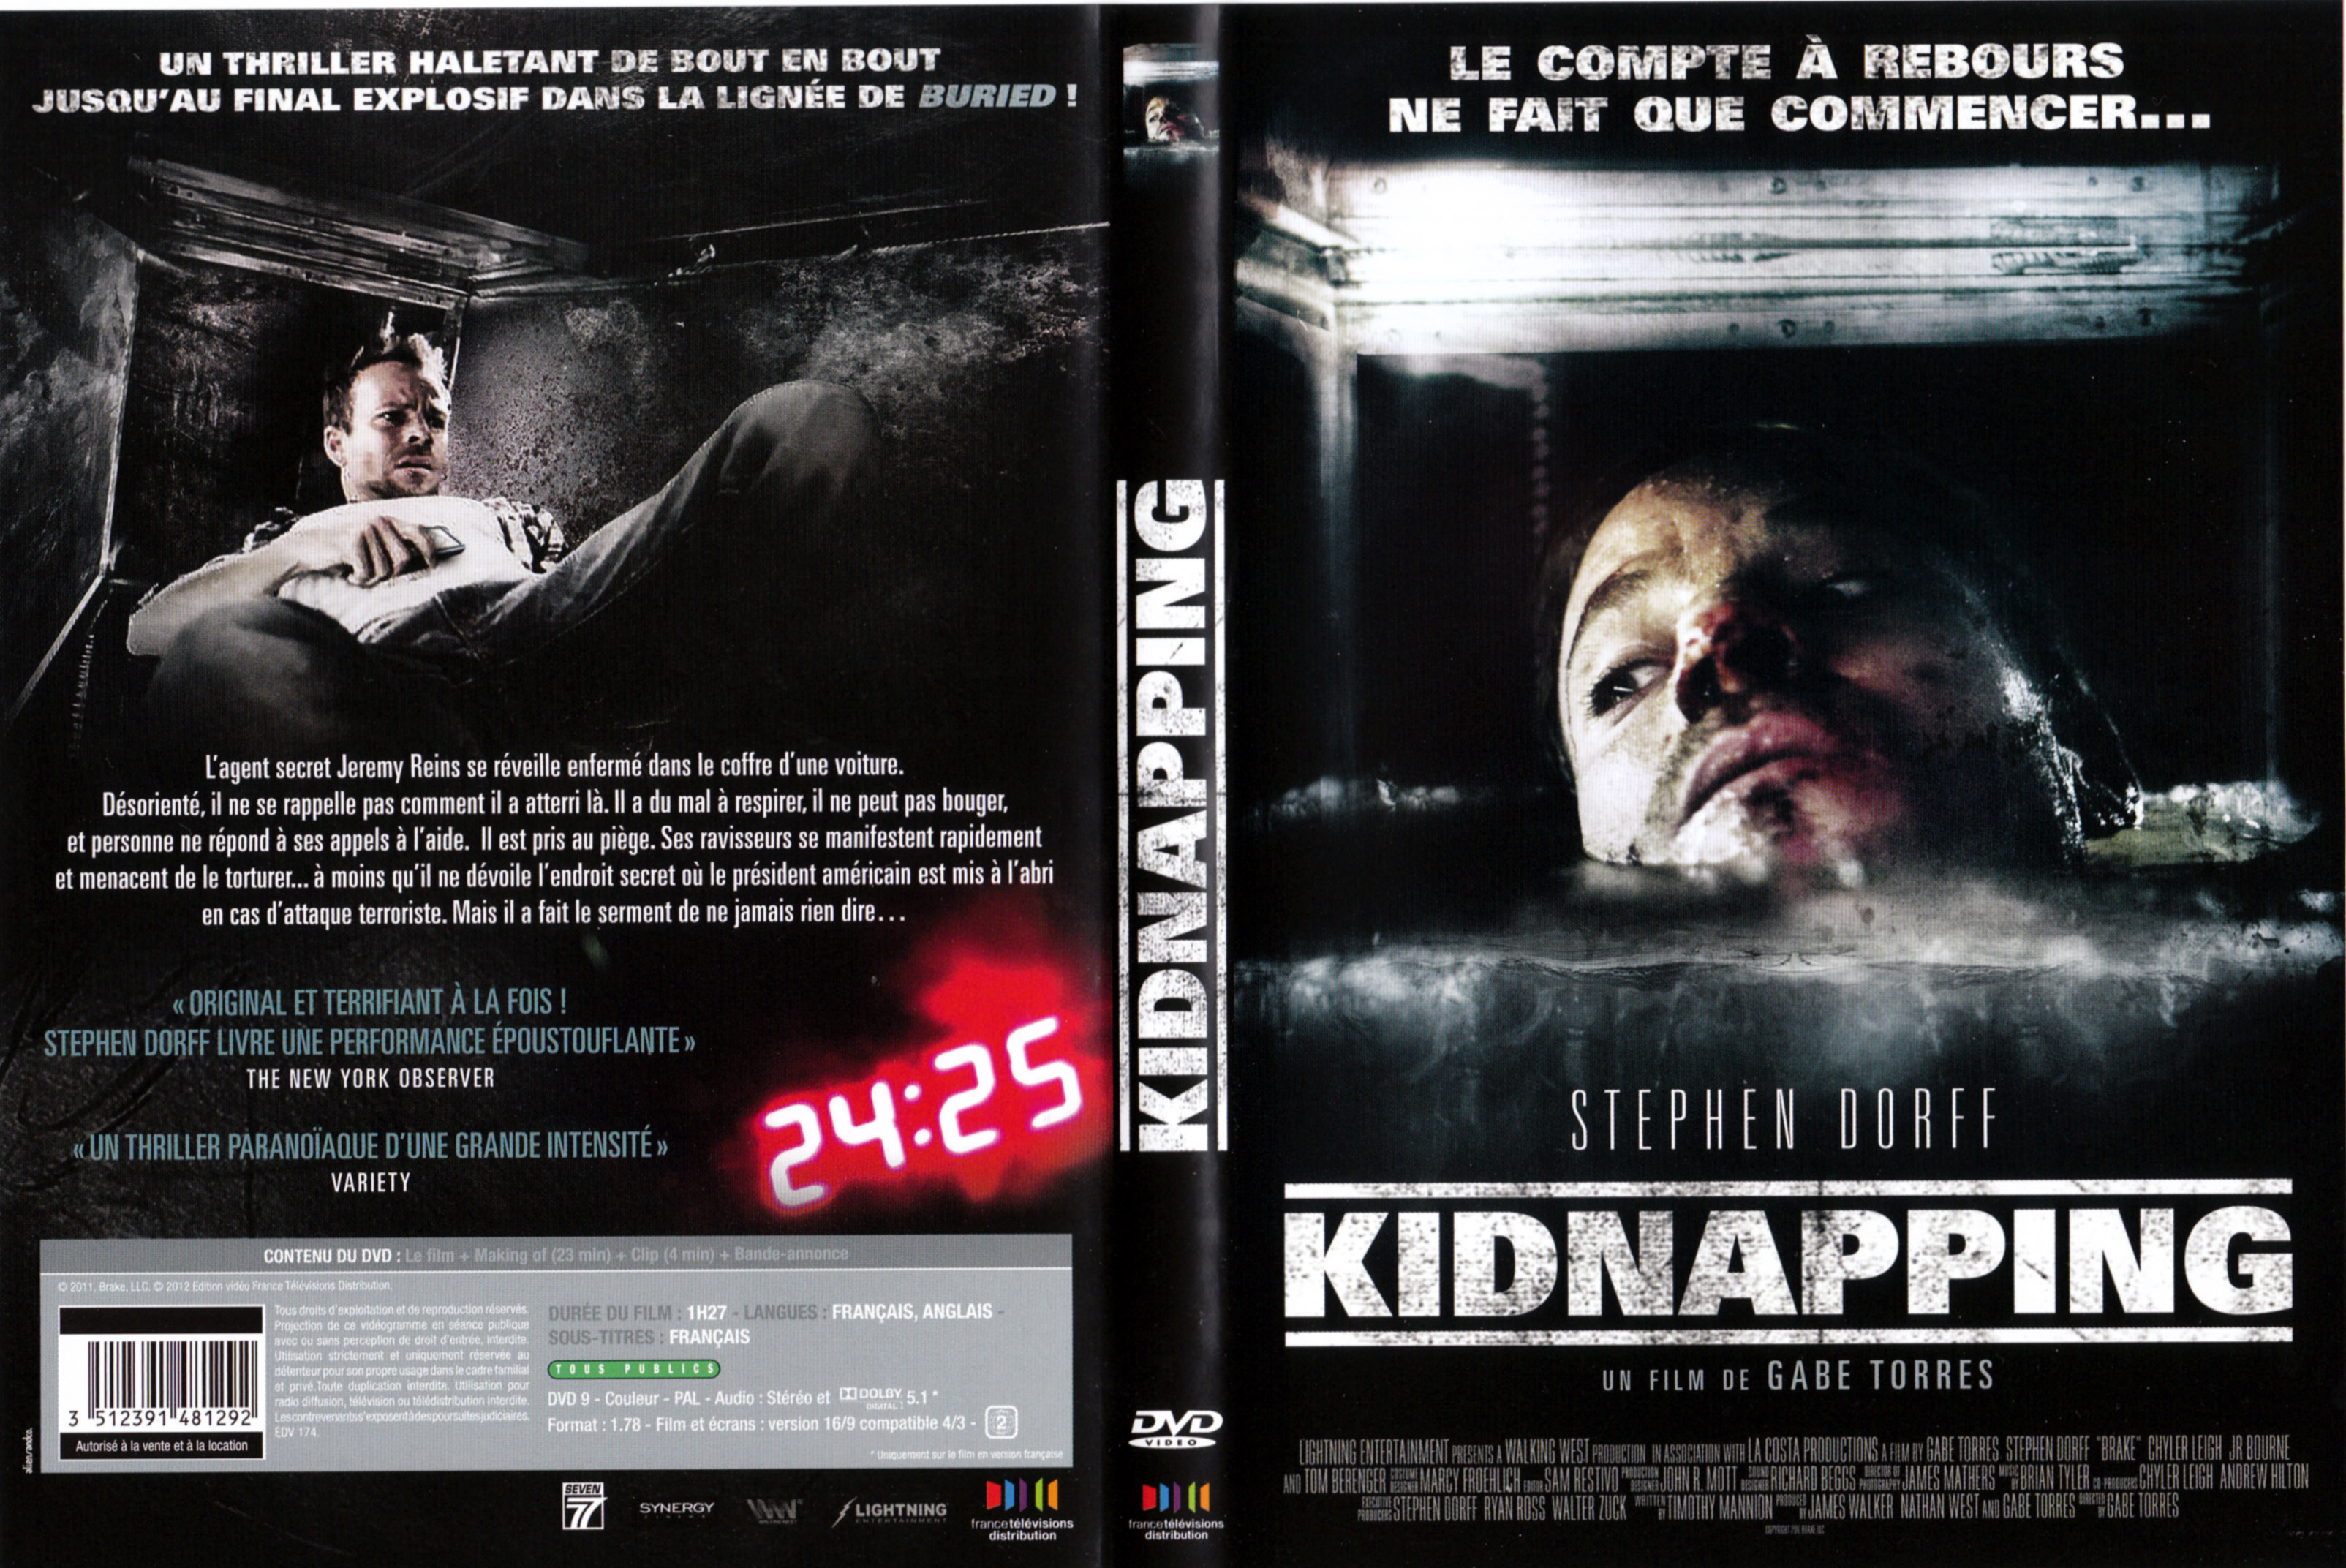 Jaquette DVD Kidnapping